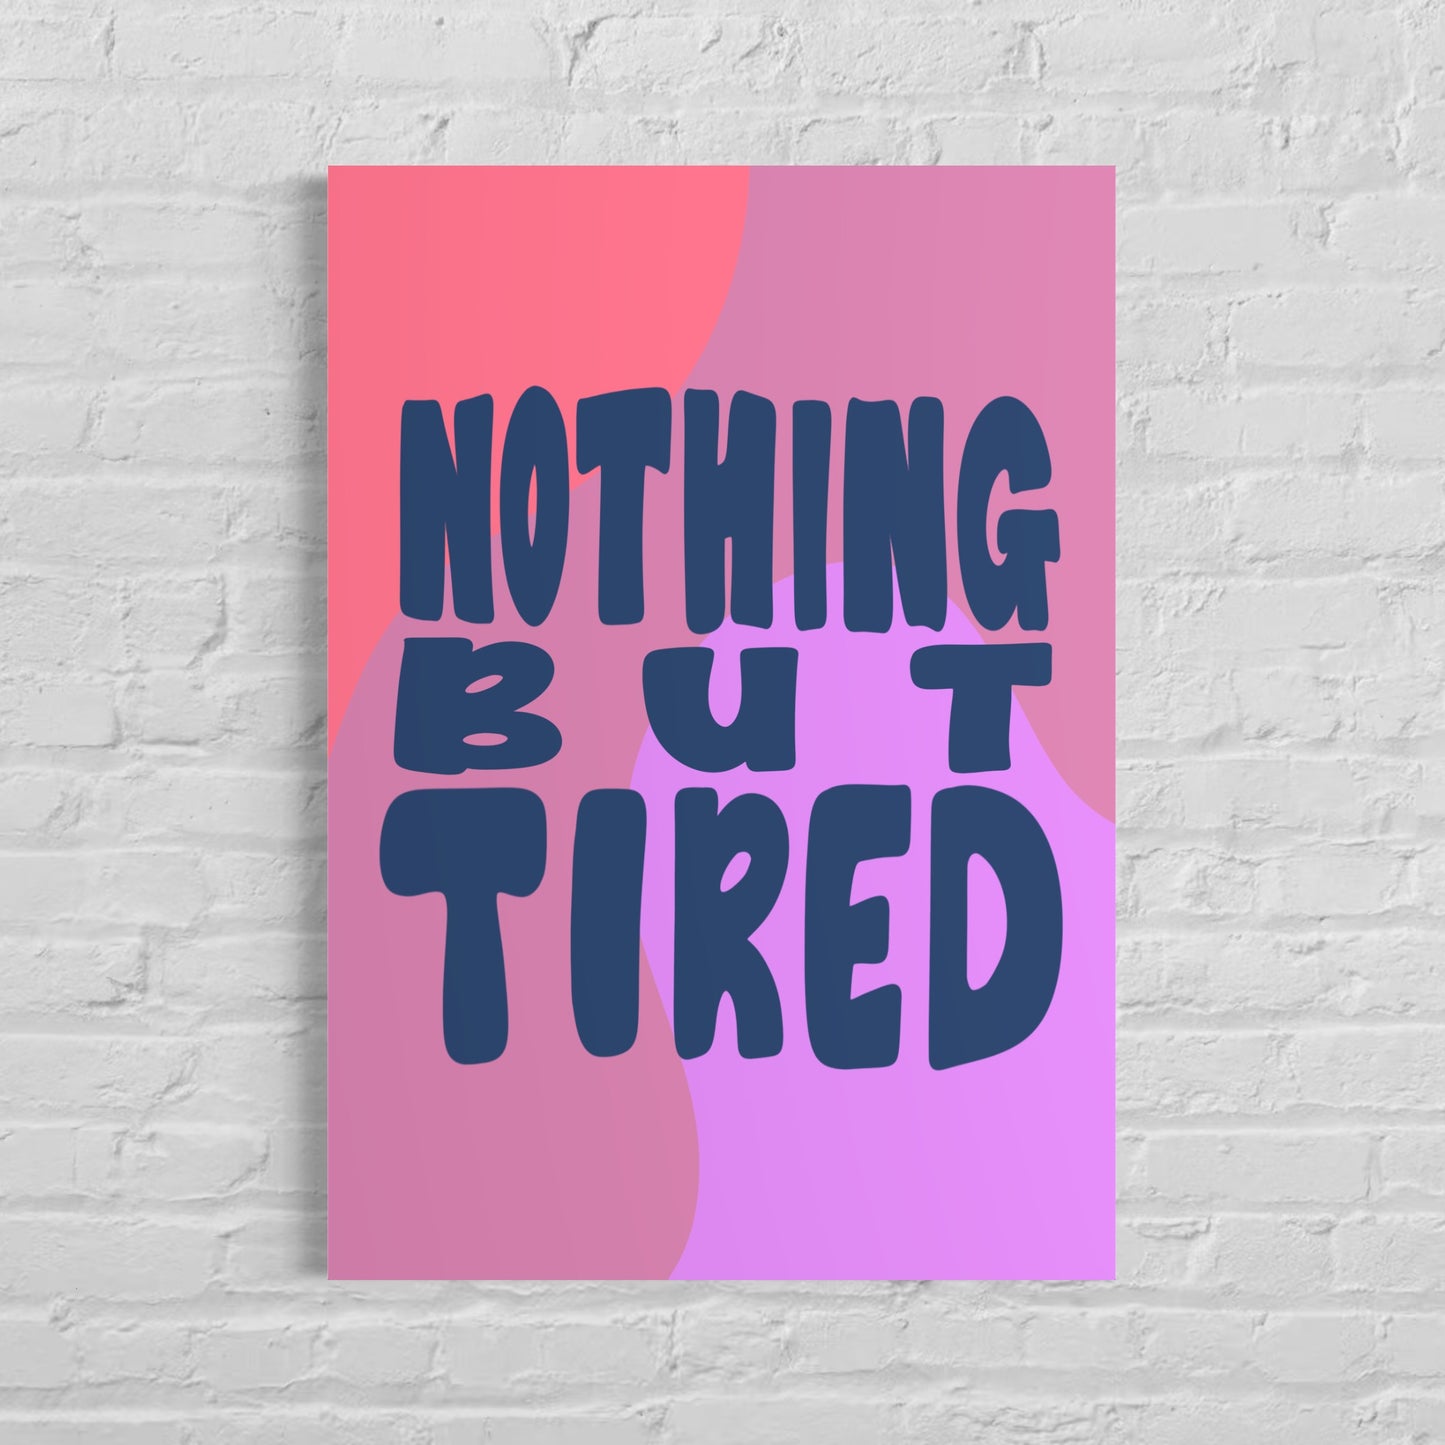 Nothing but tired print